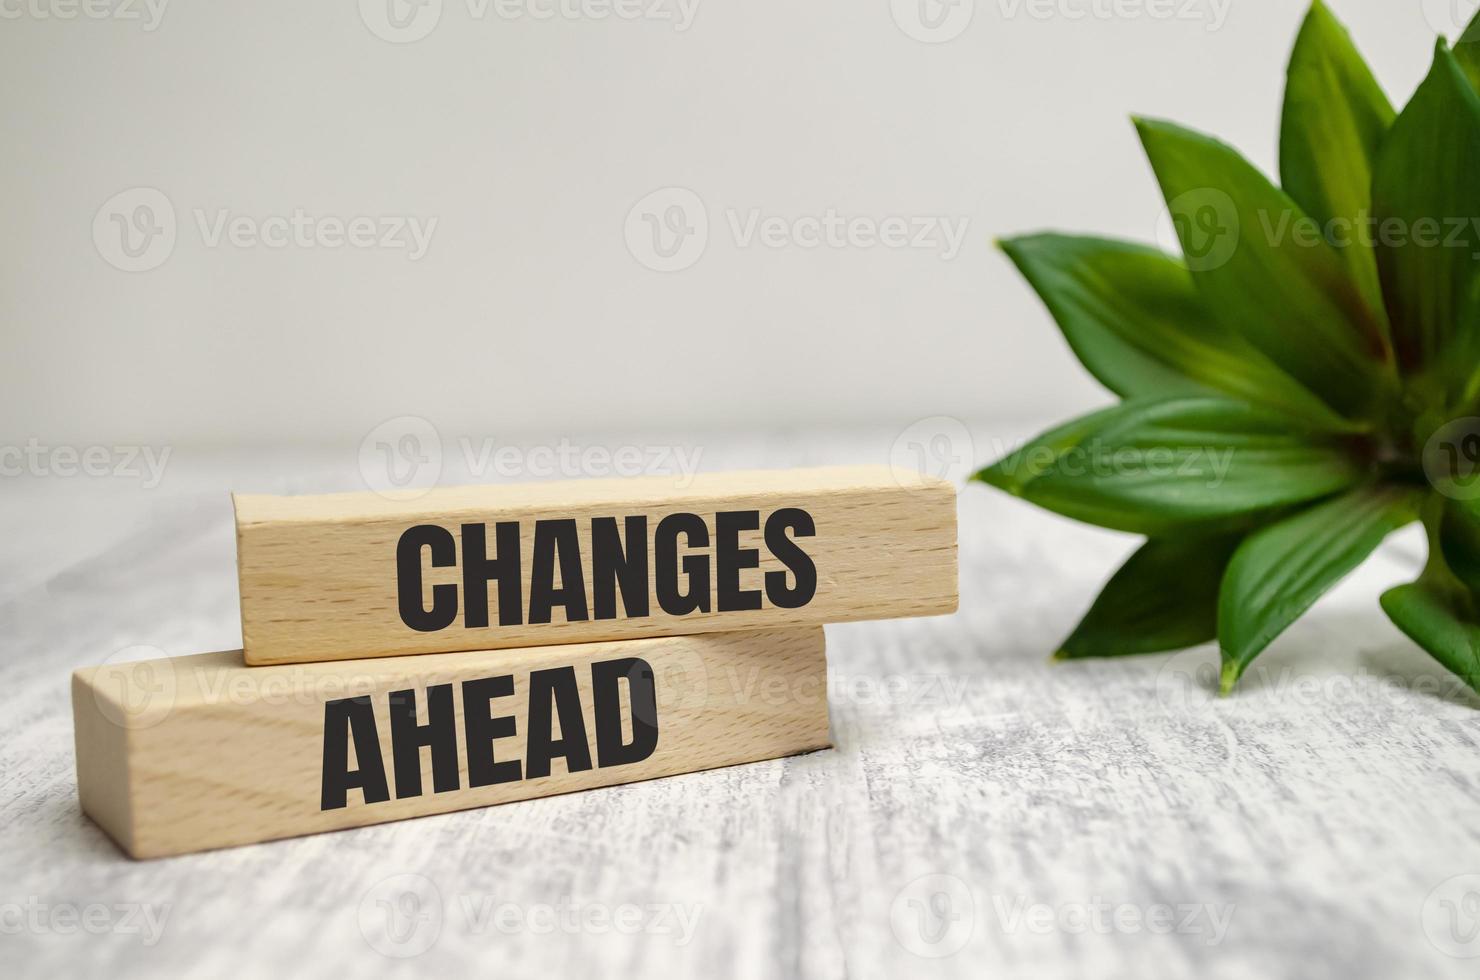 CHANGES AHEAD text on a wooden block with green plant photo